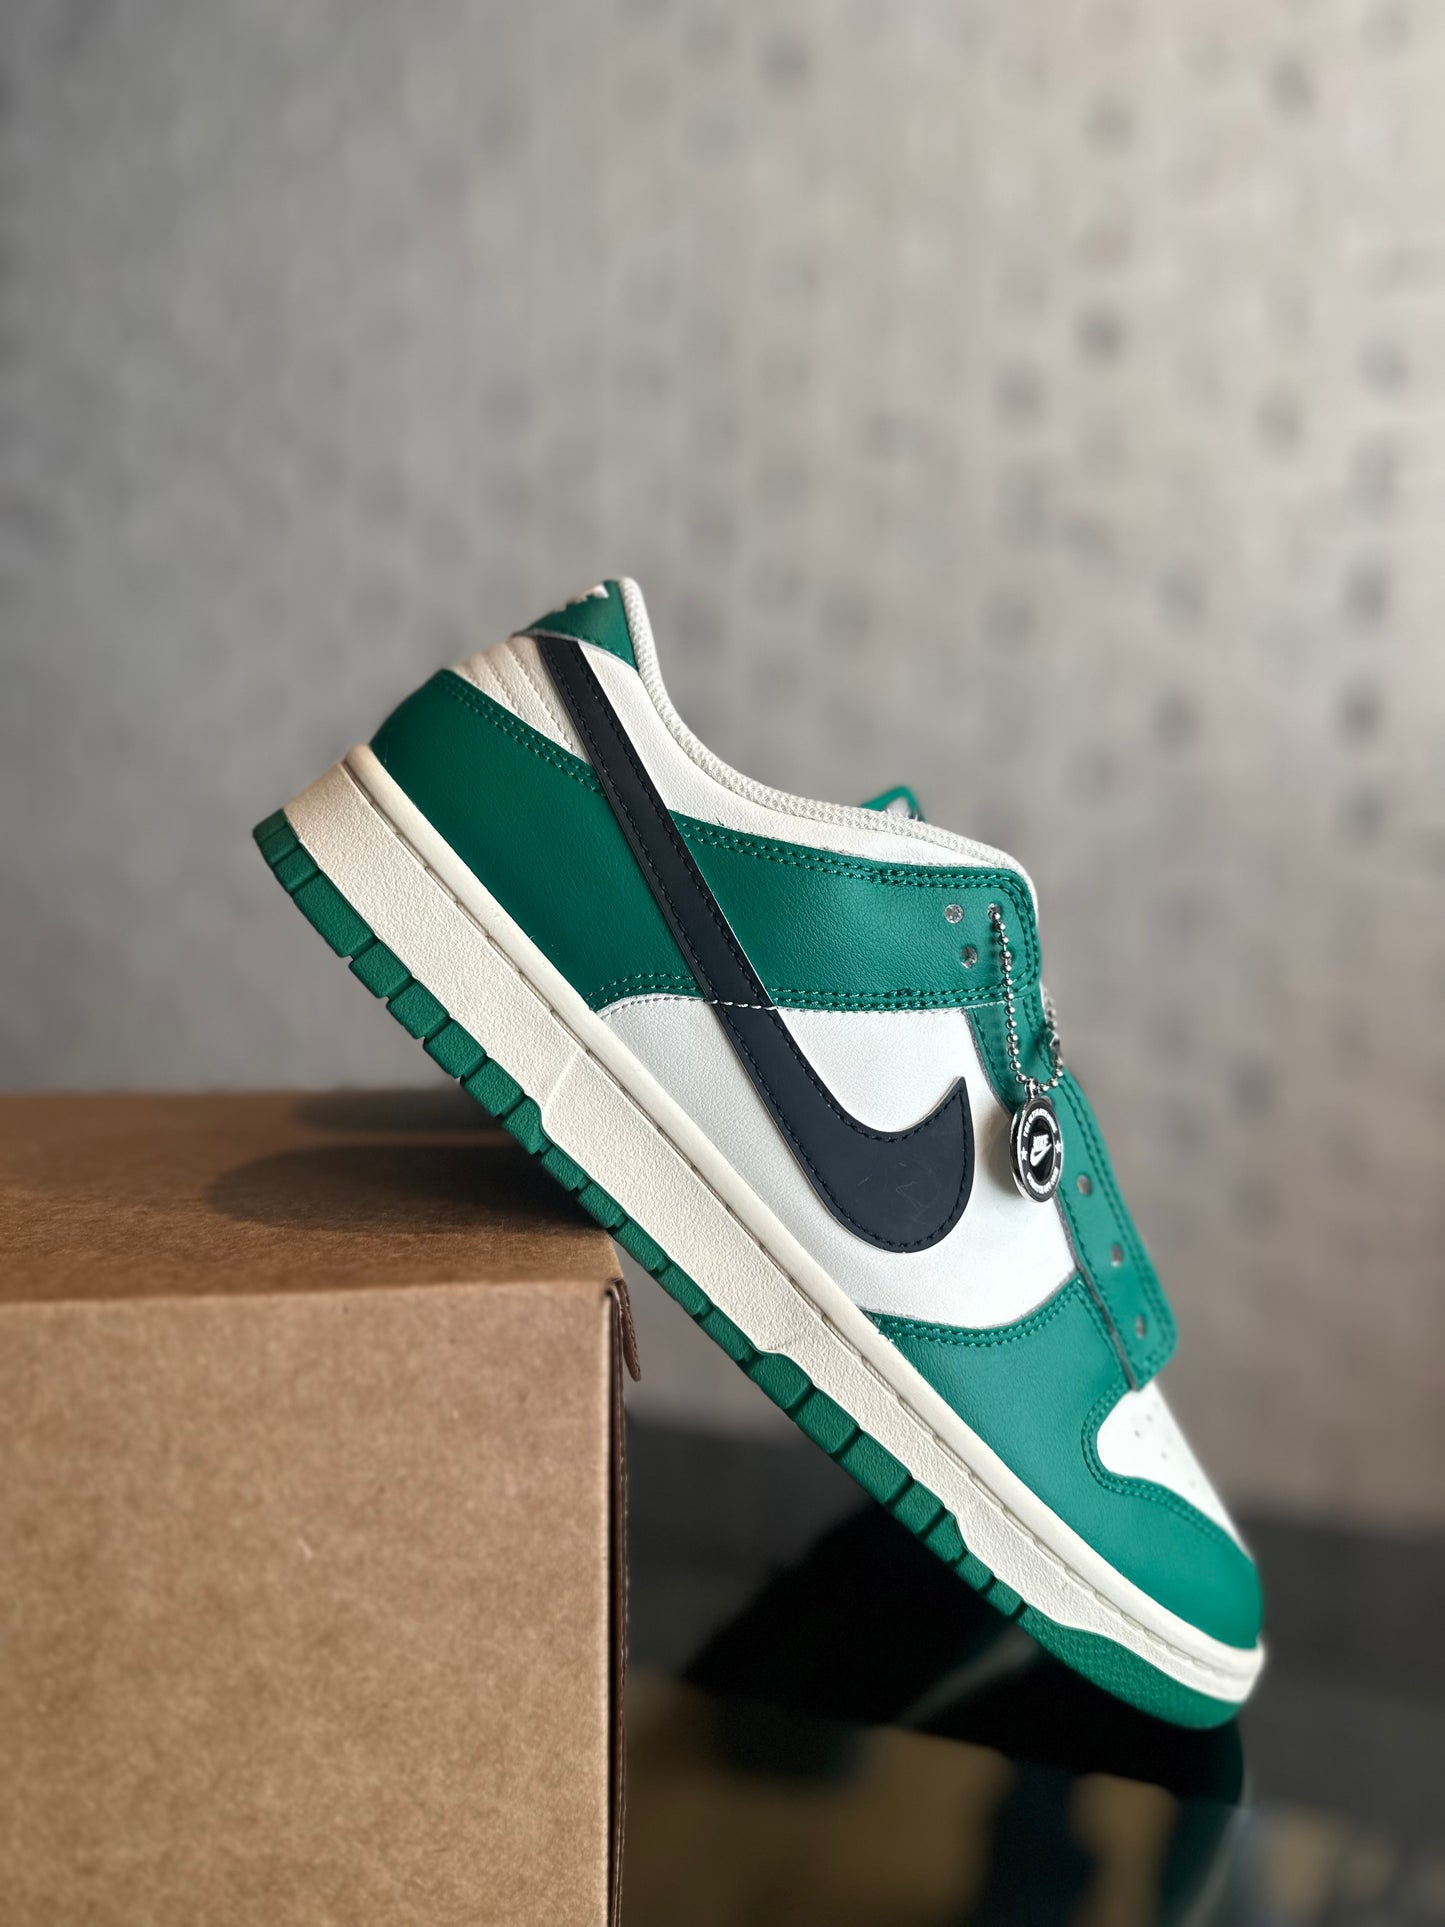 Nike Dunk Low Lottery Pack “Malachite Green” Size 11 VNDS RB